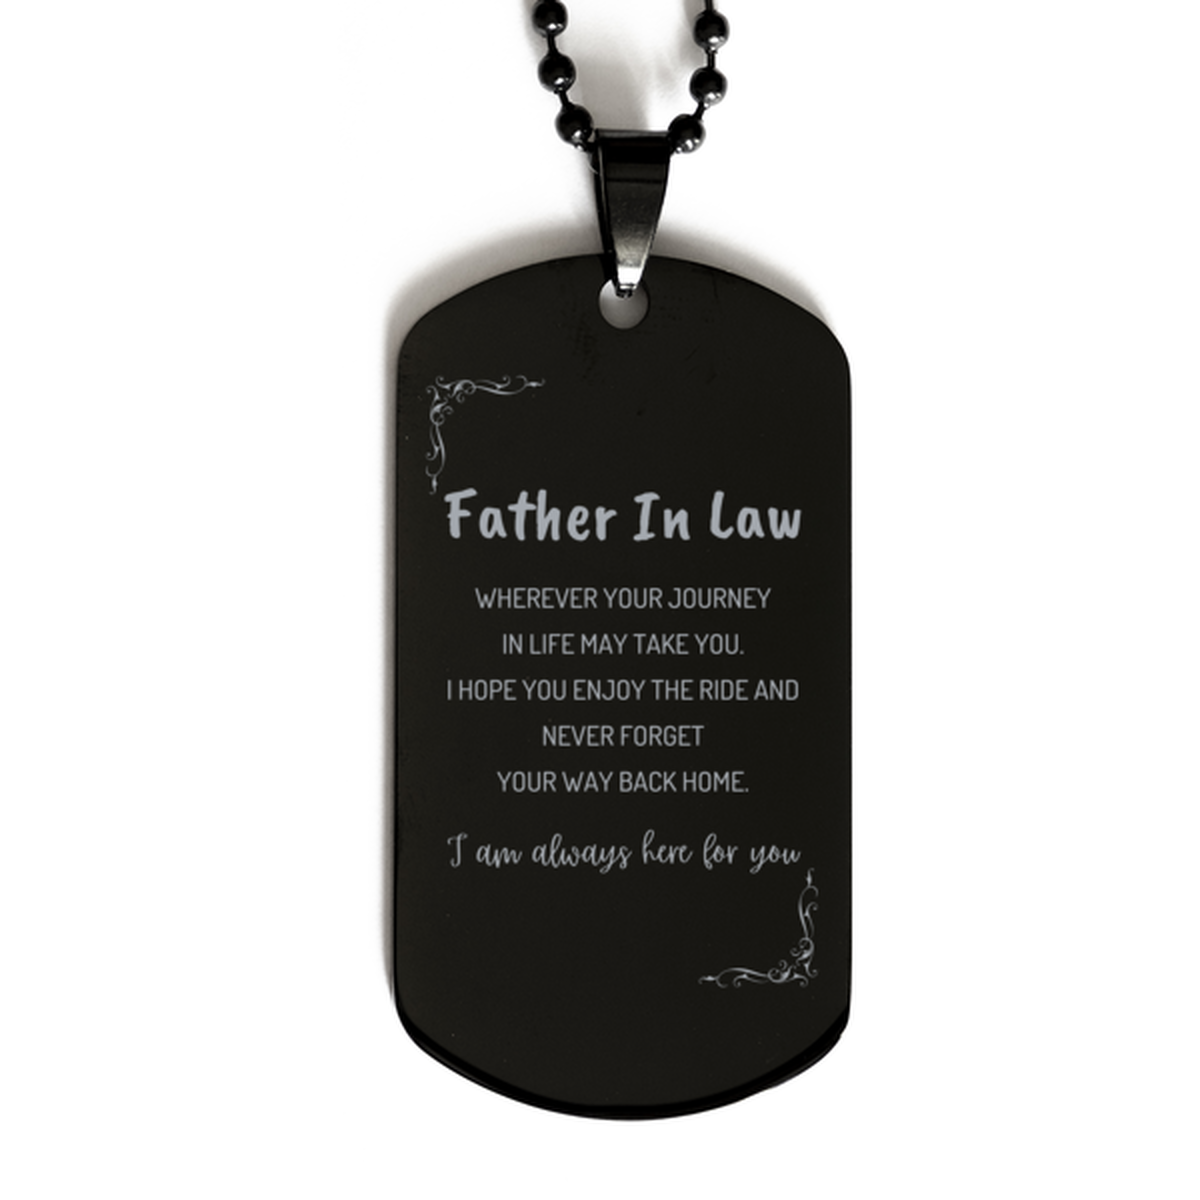 Father In Law wherever your journey in life may take you, I am always here for you Father In Law Black Dog Tag, Awesome Christmas Gifts For Father In Law, Father In Law Birthday Gifts for Men Women Family Loved One